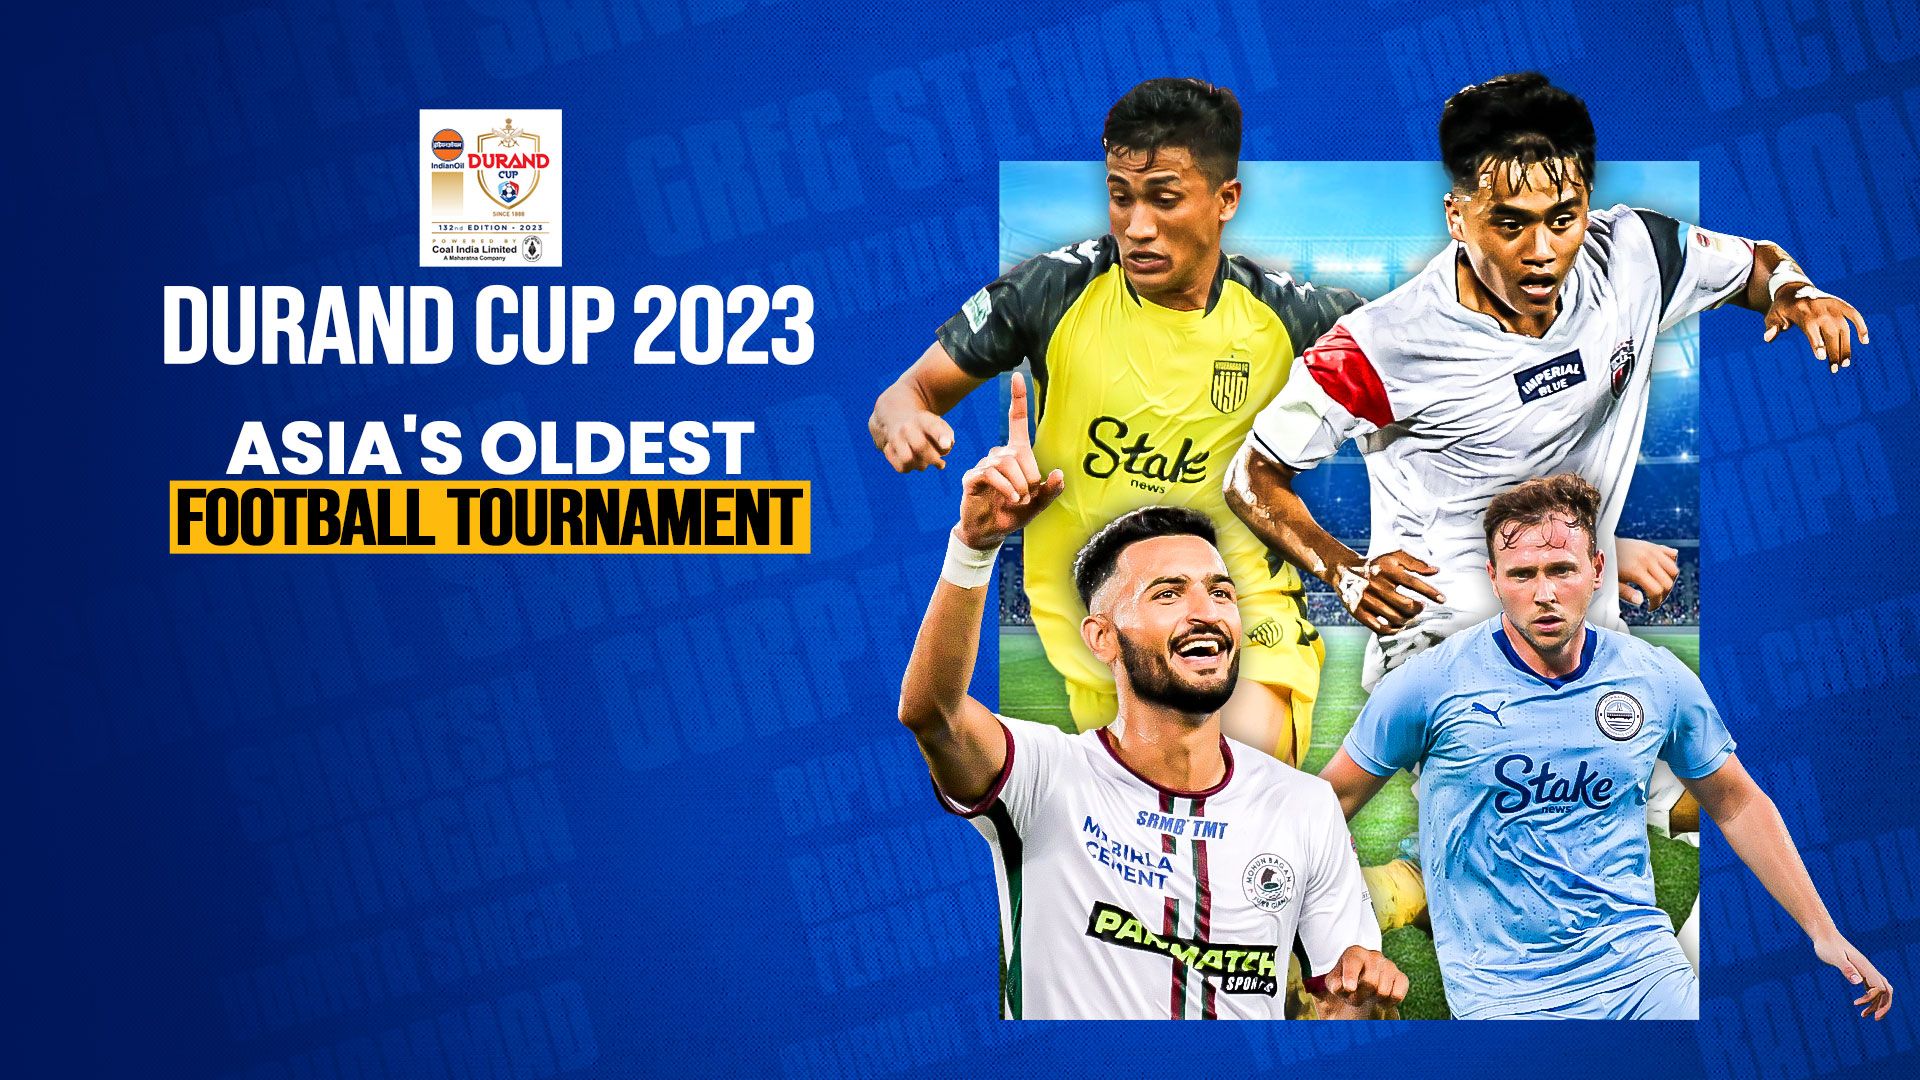 IndianOil Durand Cup 2023